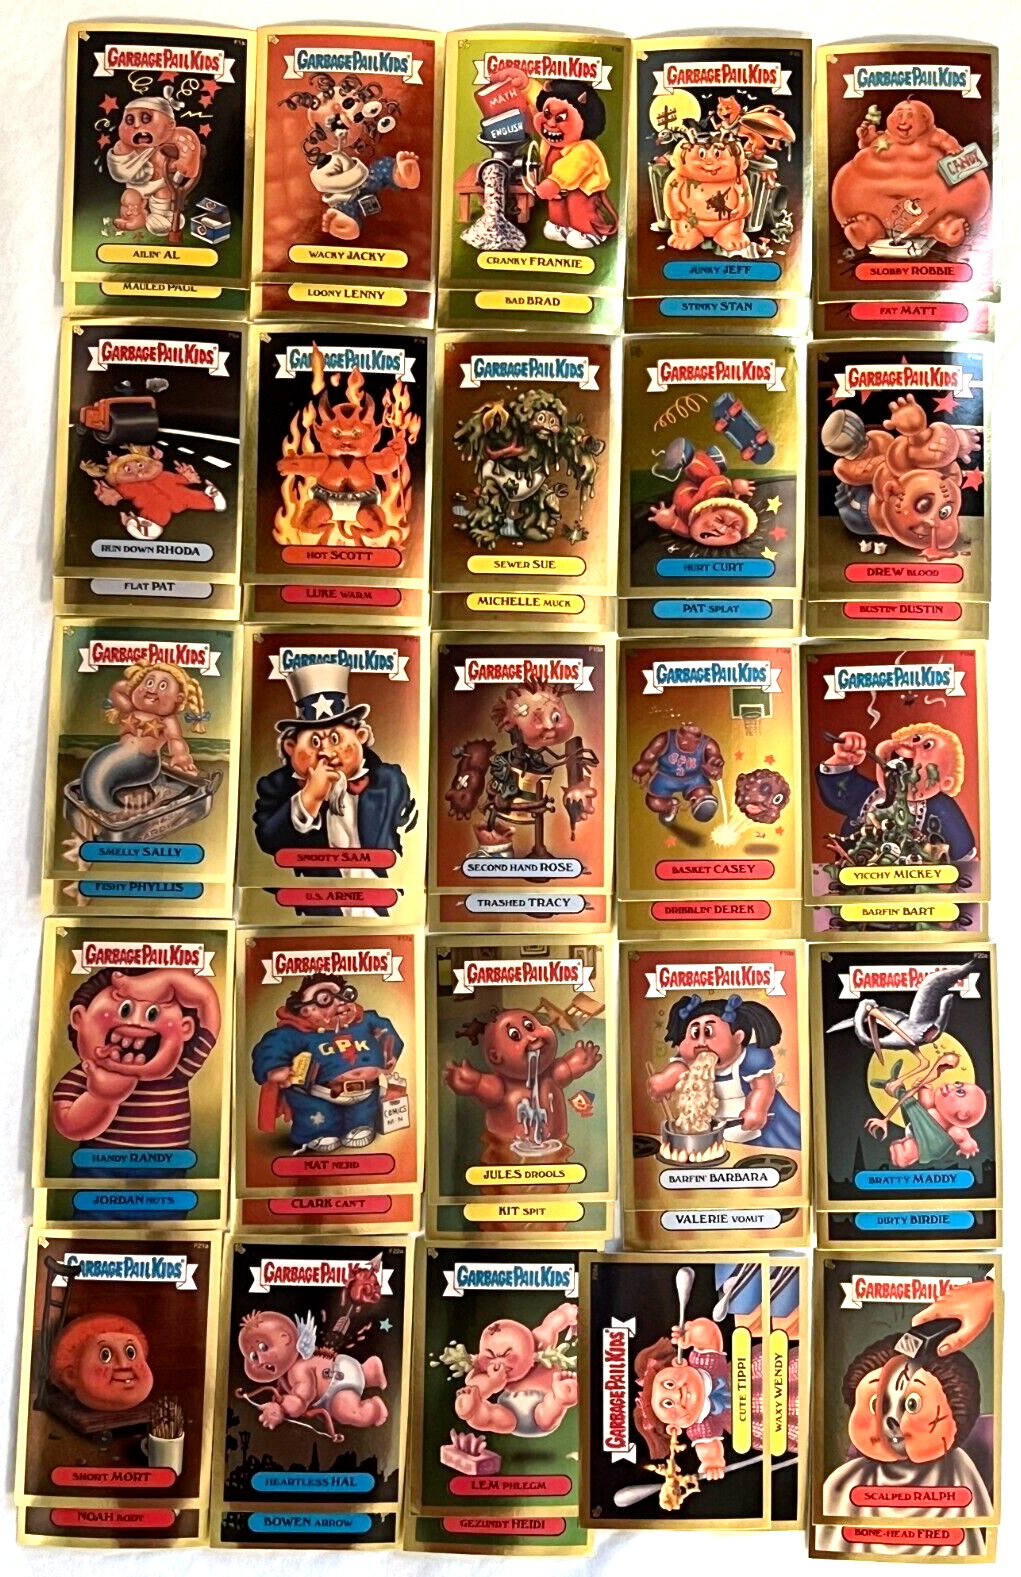 2004 Garbage Pail Kids ALL NEW SERIES 2 ANS2 Gold Foil Complete 50-Card Set GPK